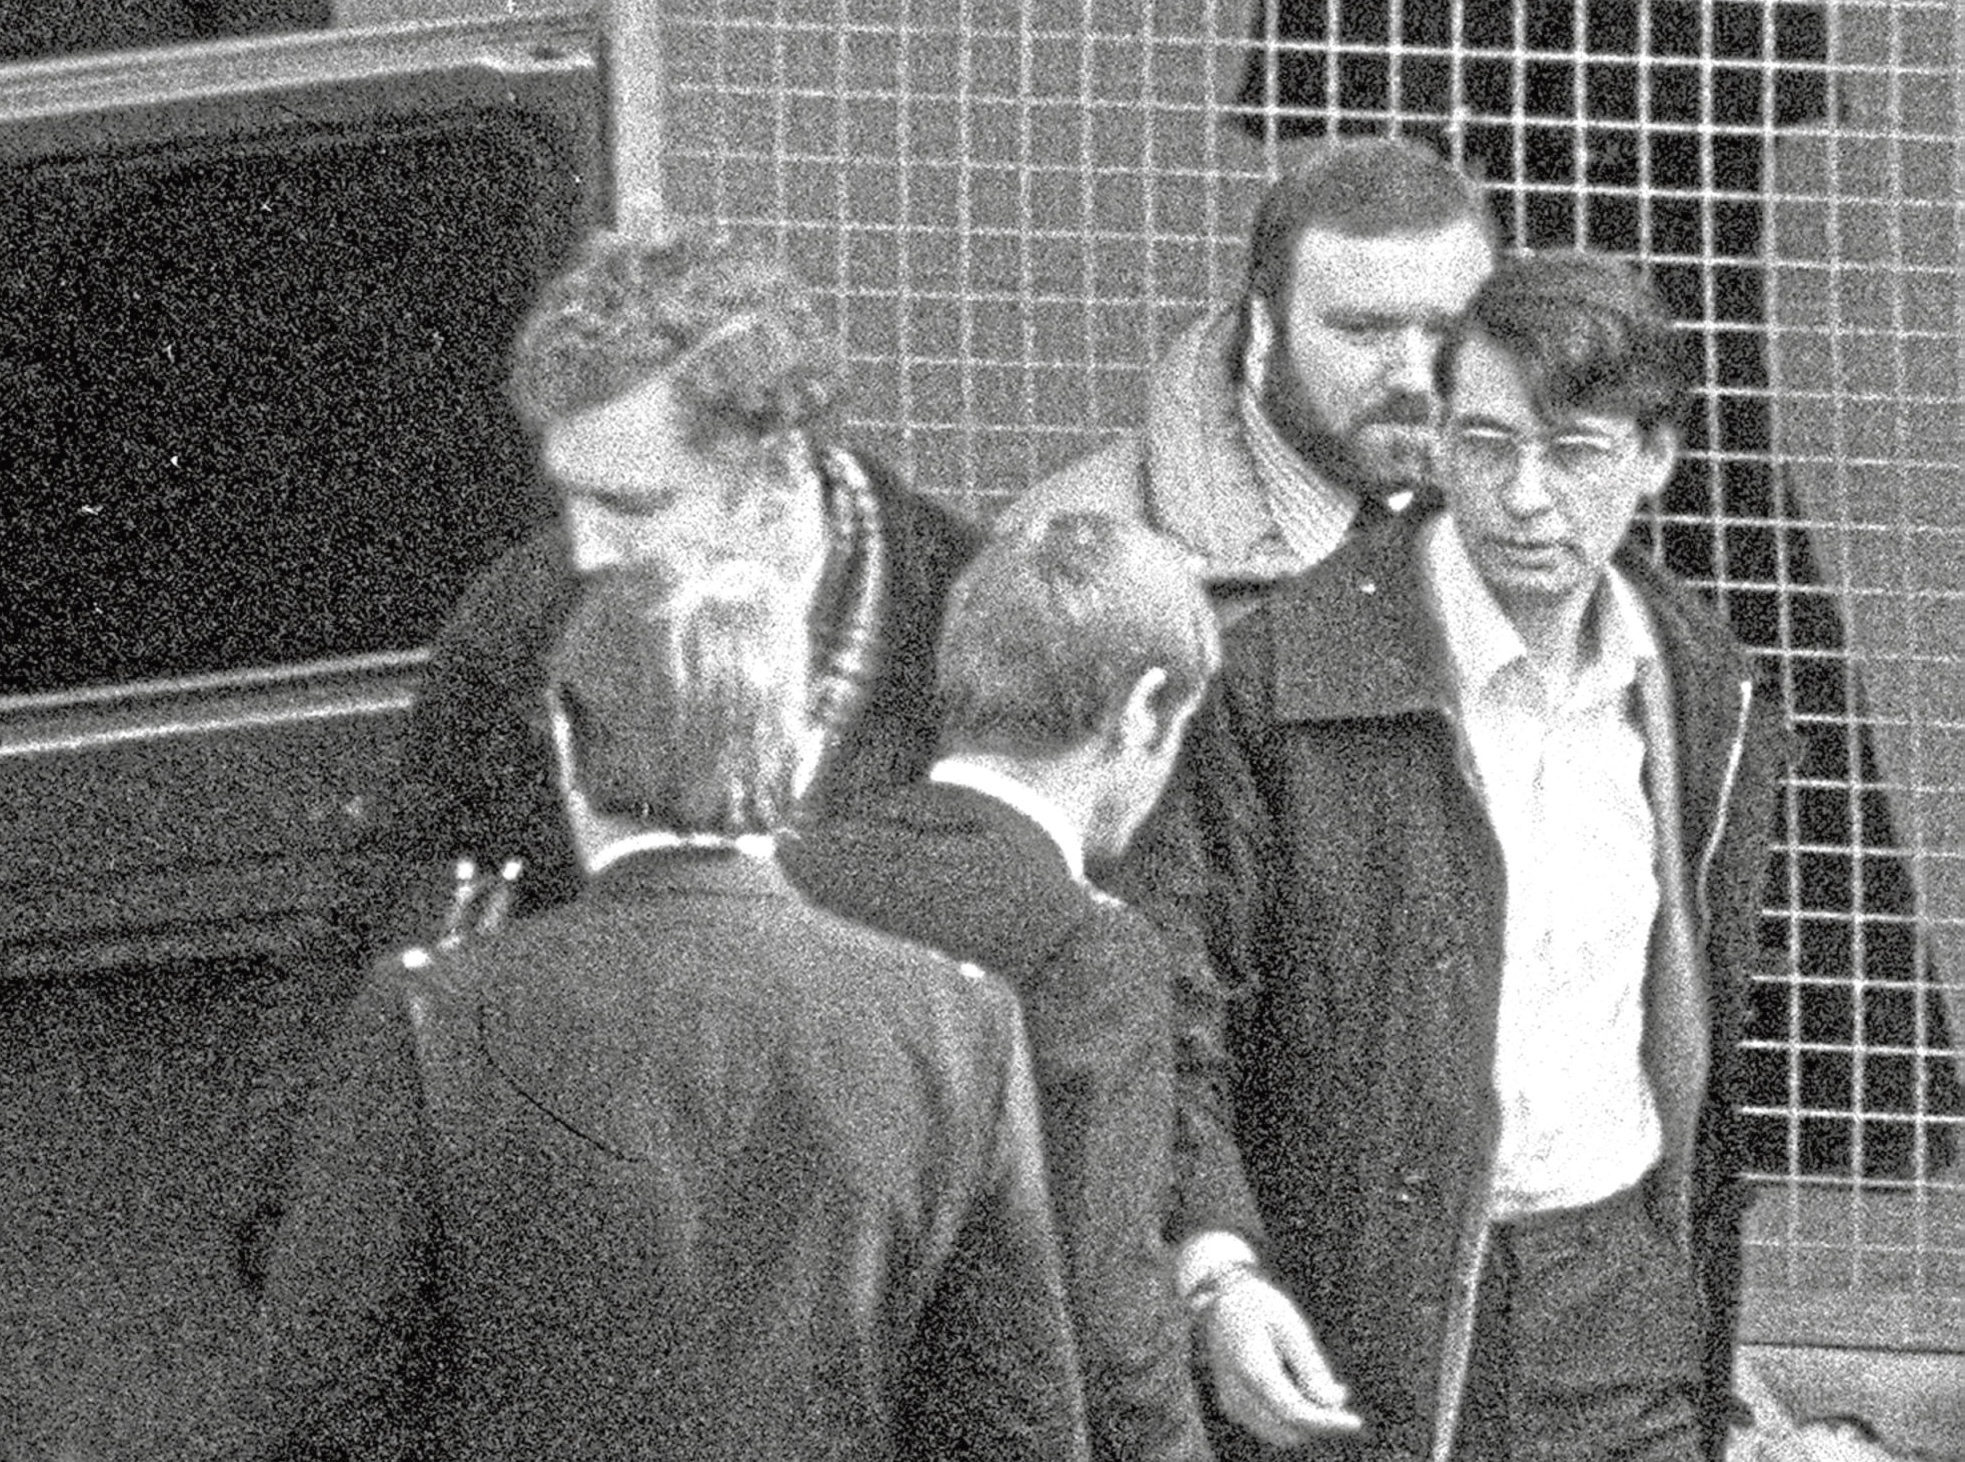 Dennis Nilsen, right, leaving Highgate Magistrates Court where he was charged with the murder of Stephen Sinclair